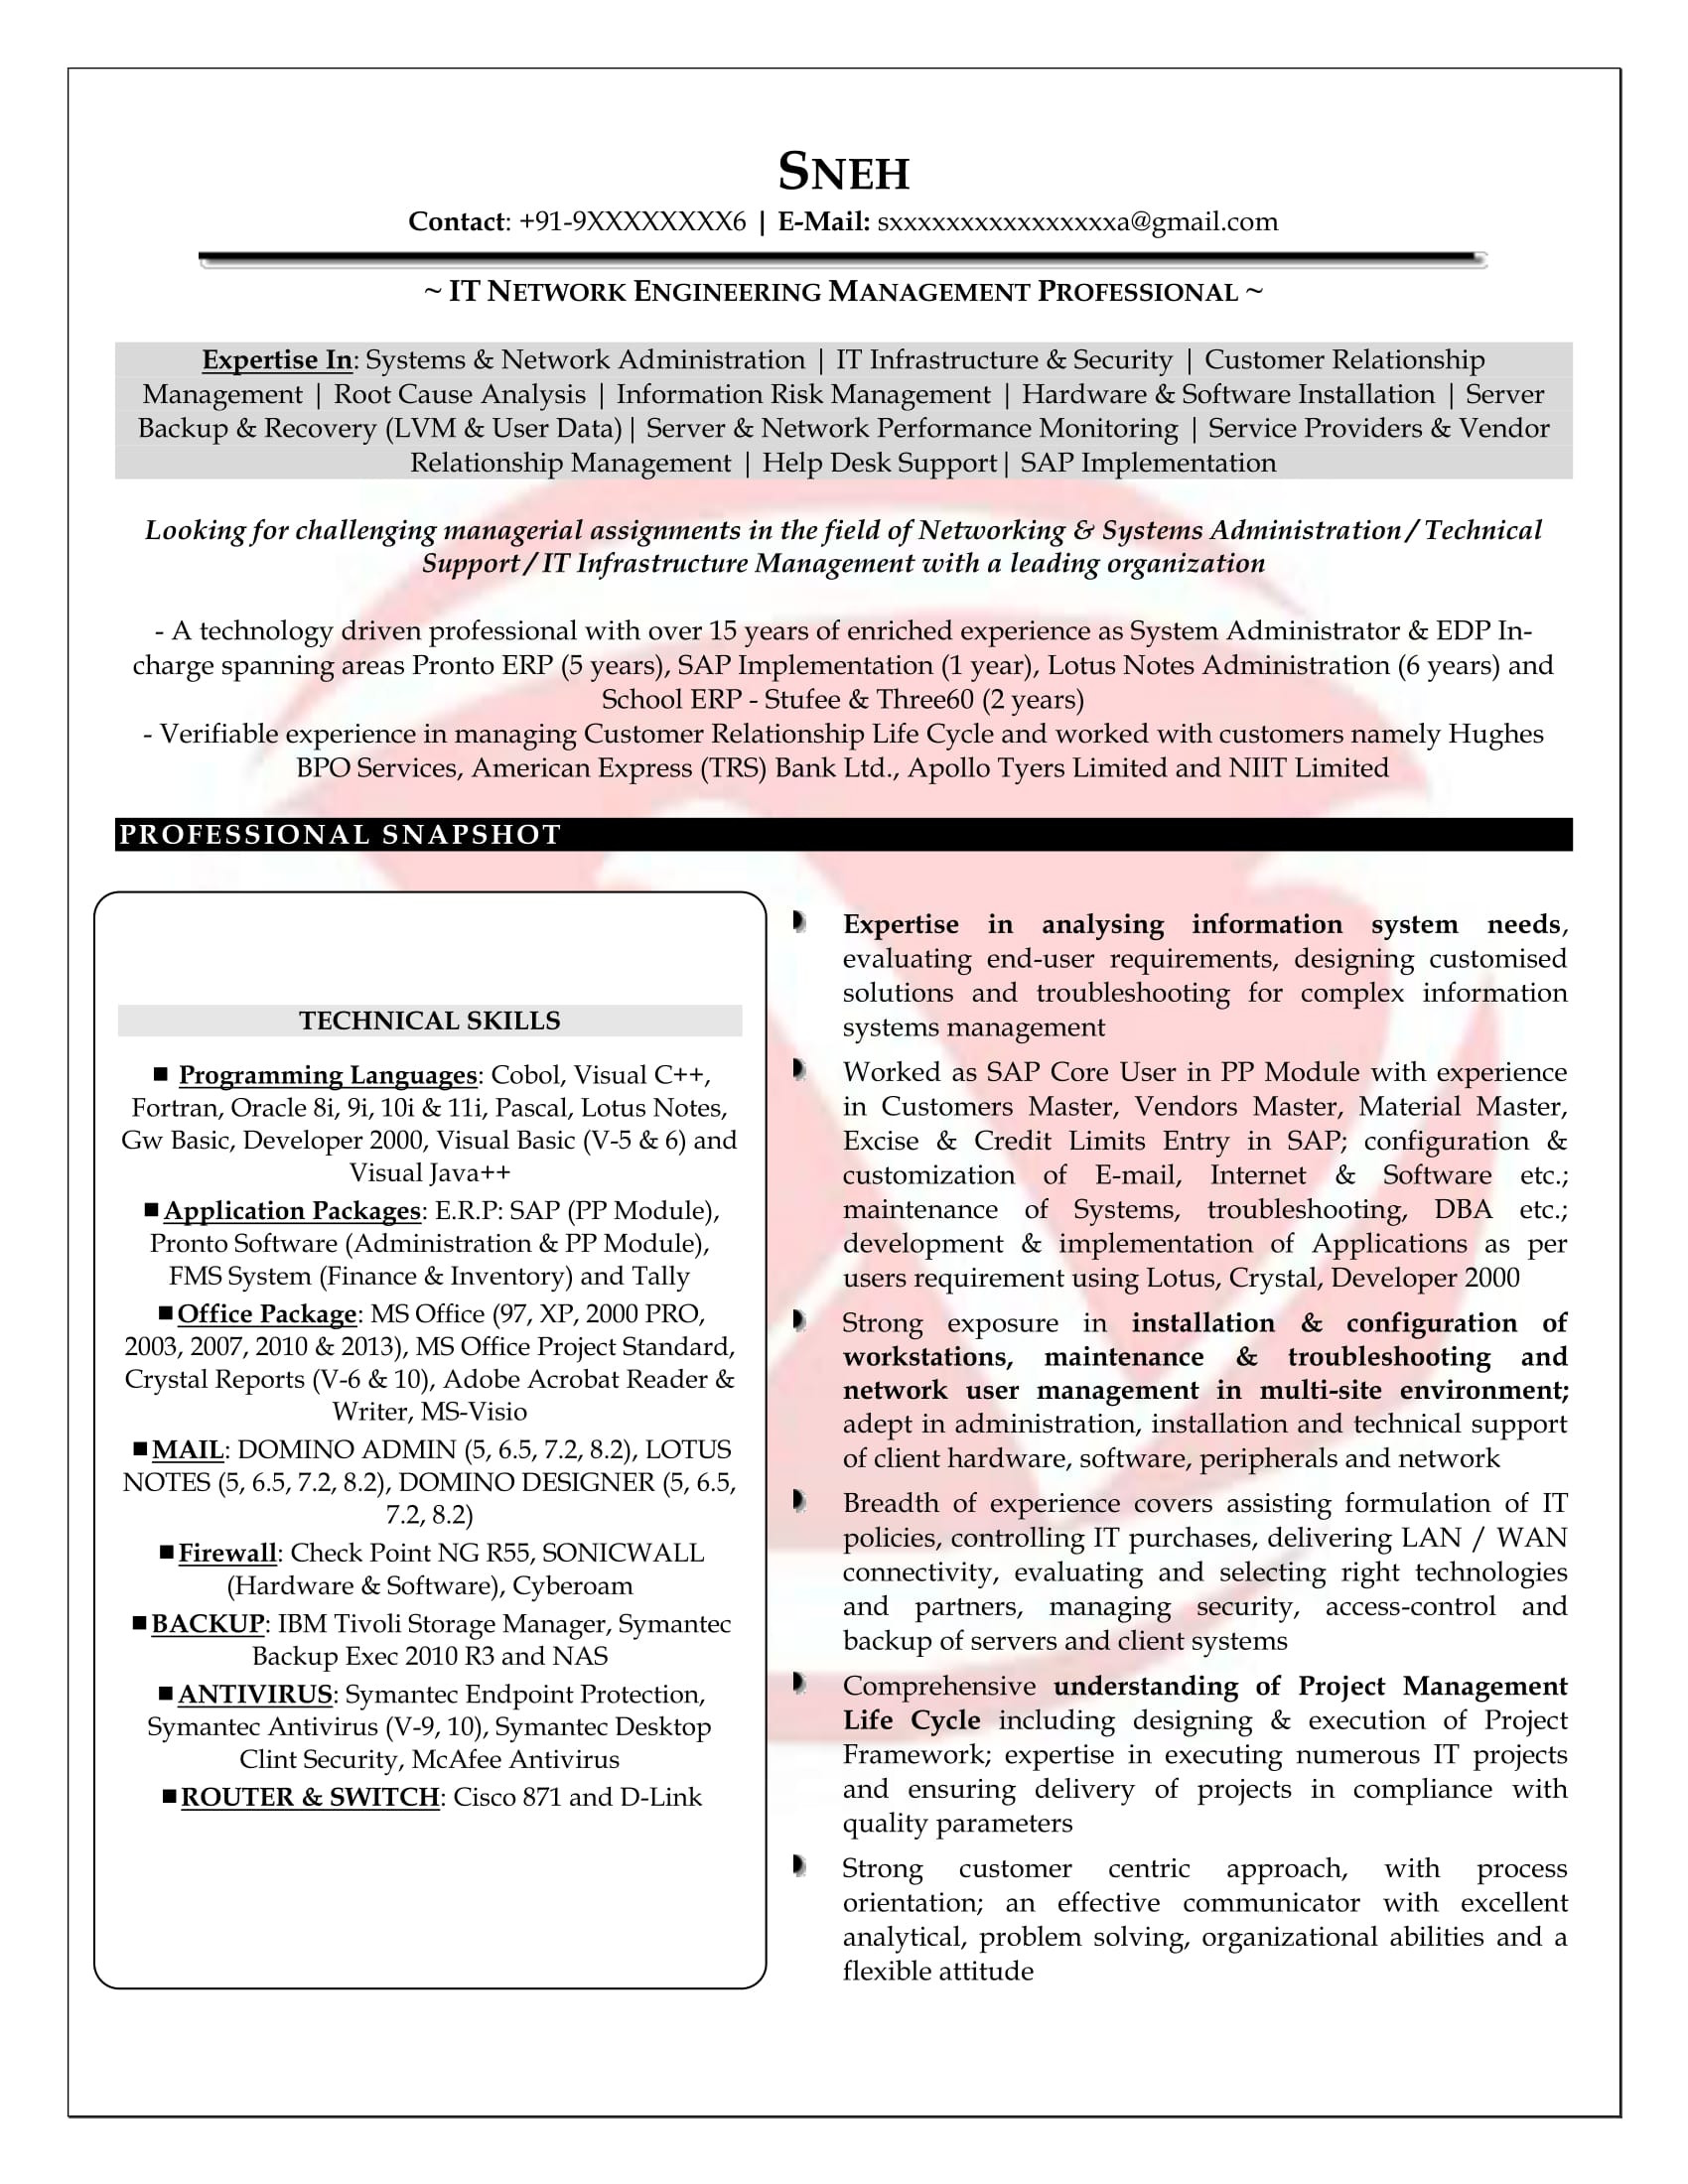 Network Engineer Sample Resume with 10 Years Experience Network Engineer Sample Resumes, Download Resume format Templates!